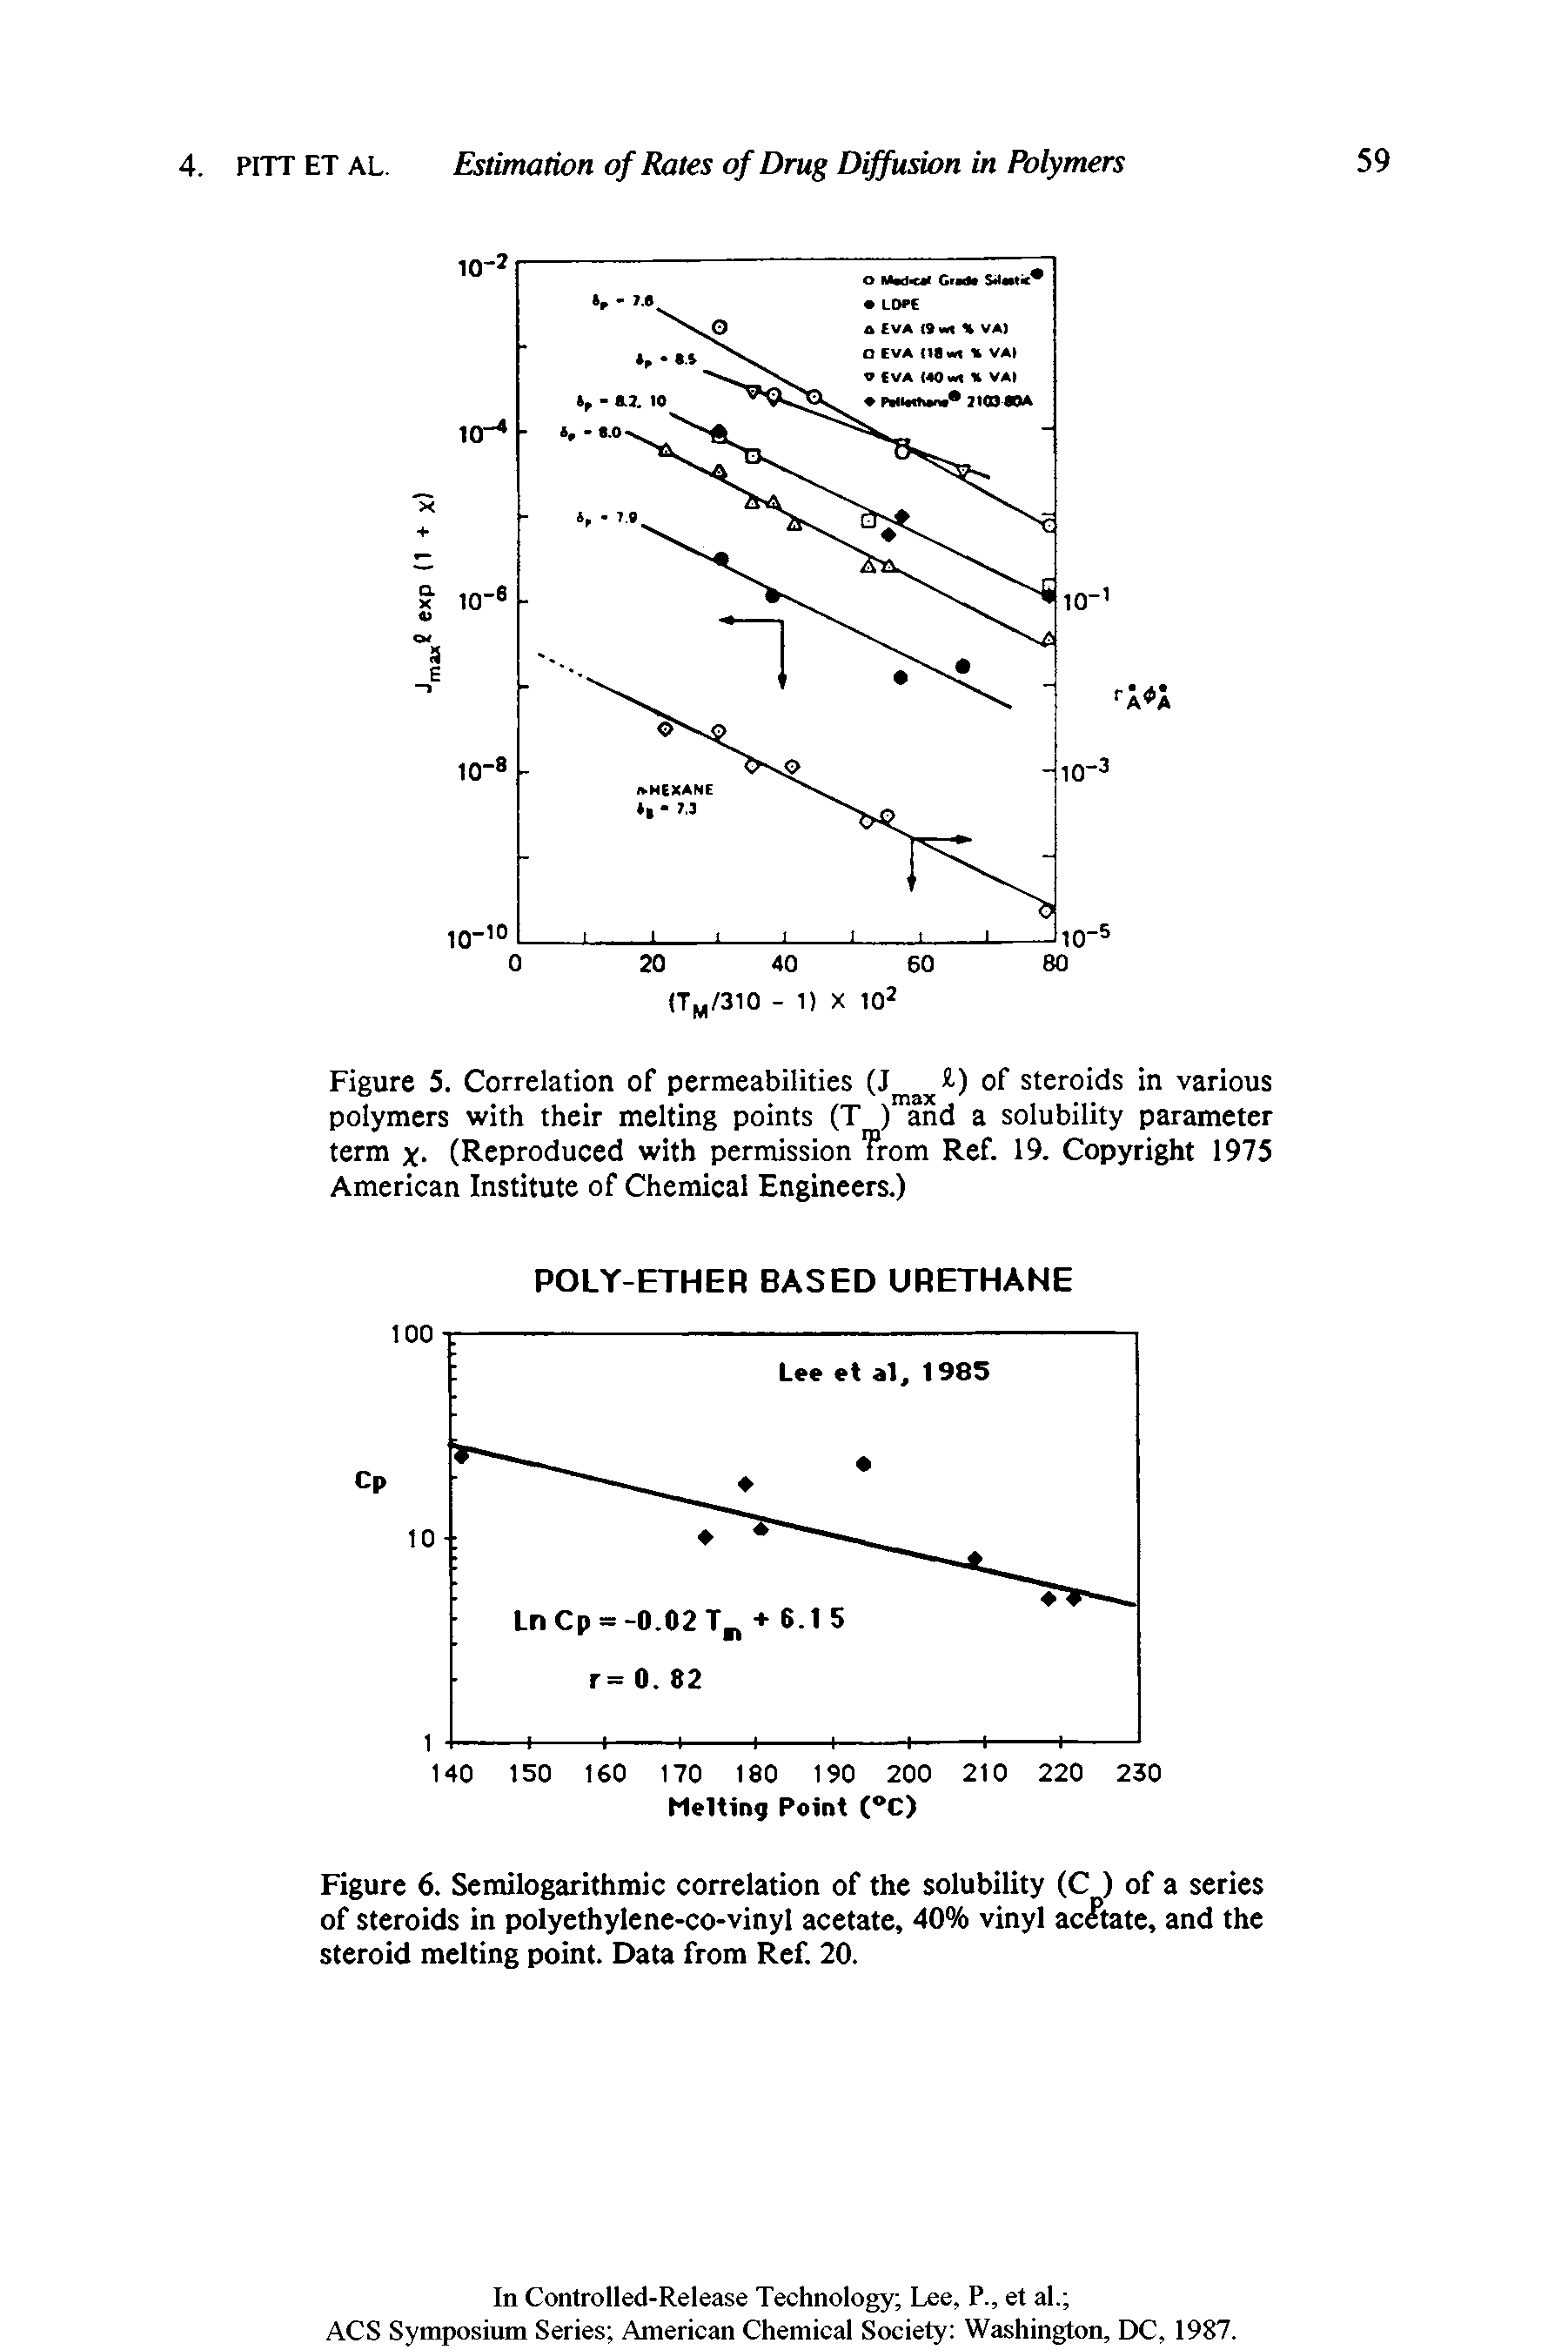 Figure 5. Correlation of permeabilities (J ) of steroids in various polymers with their melting points (T ) and a solubility parameter term x (Reproduced with permission from Ref. 19. Copyright 1975 American Institute of Chemical Engineers.)...